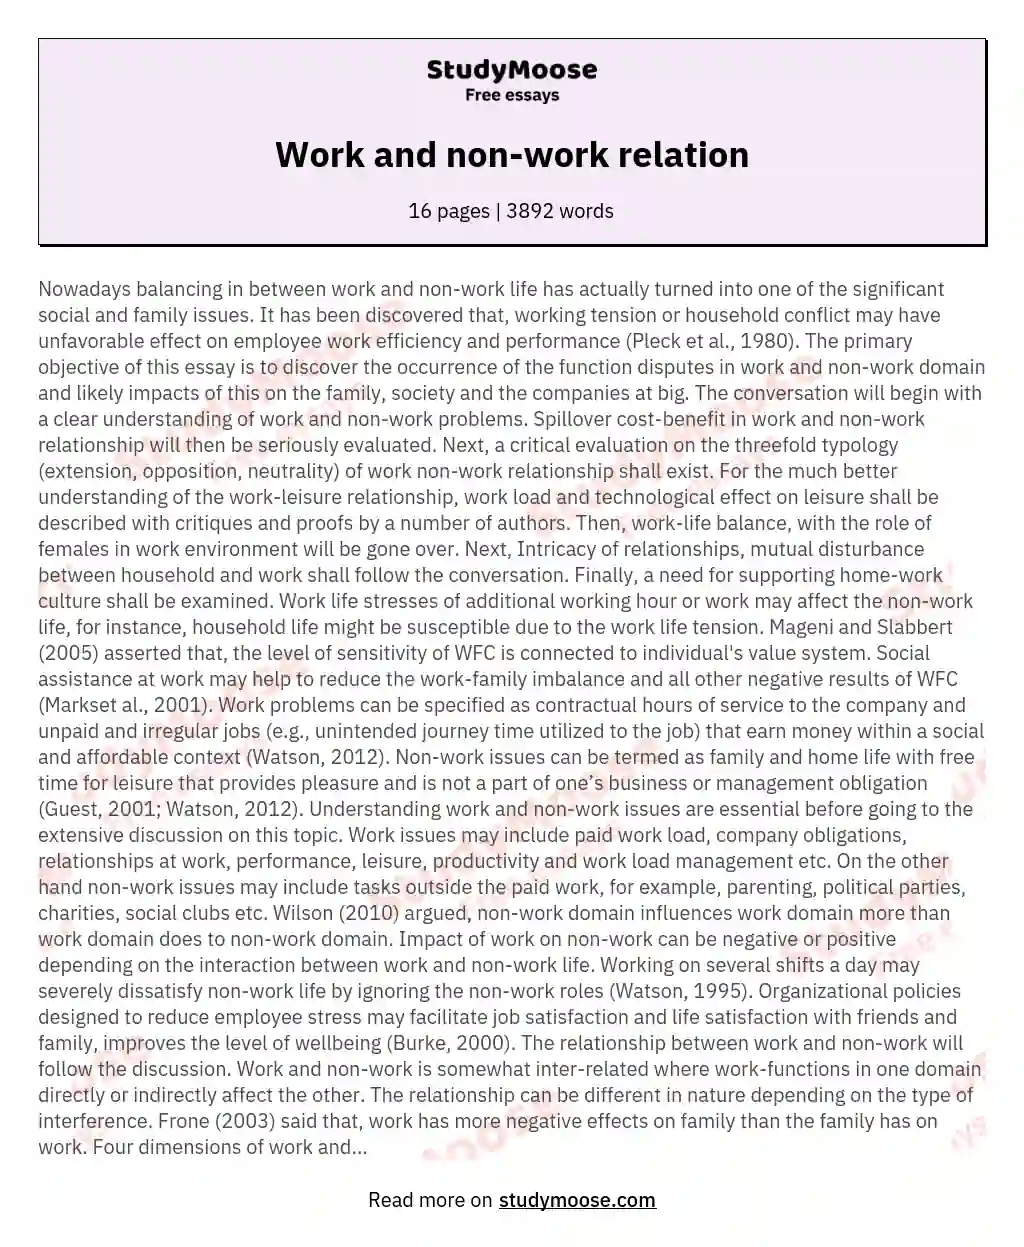 Work and non-work relation essay